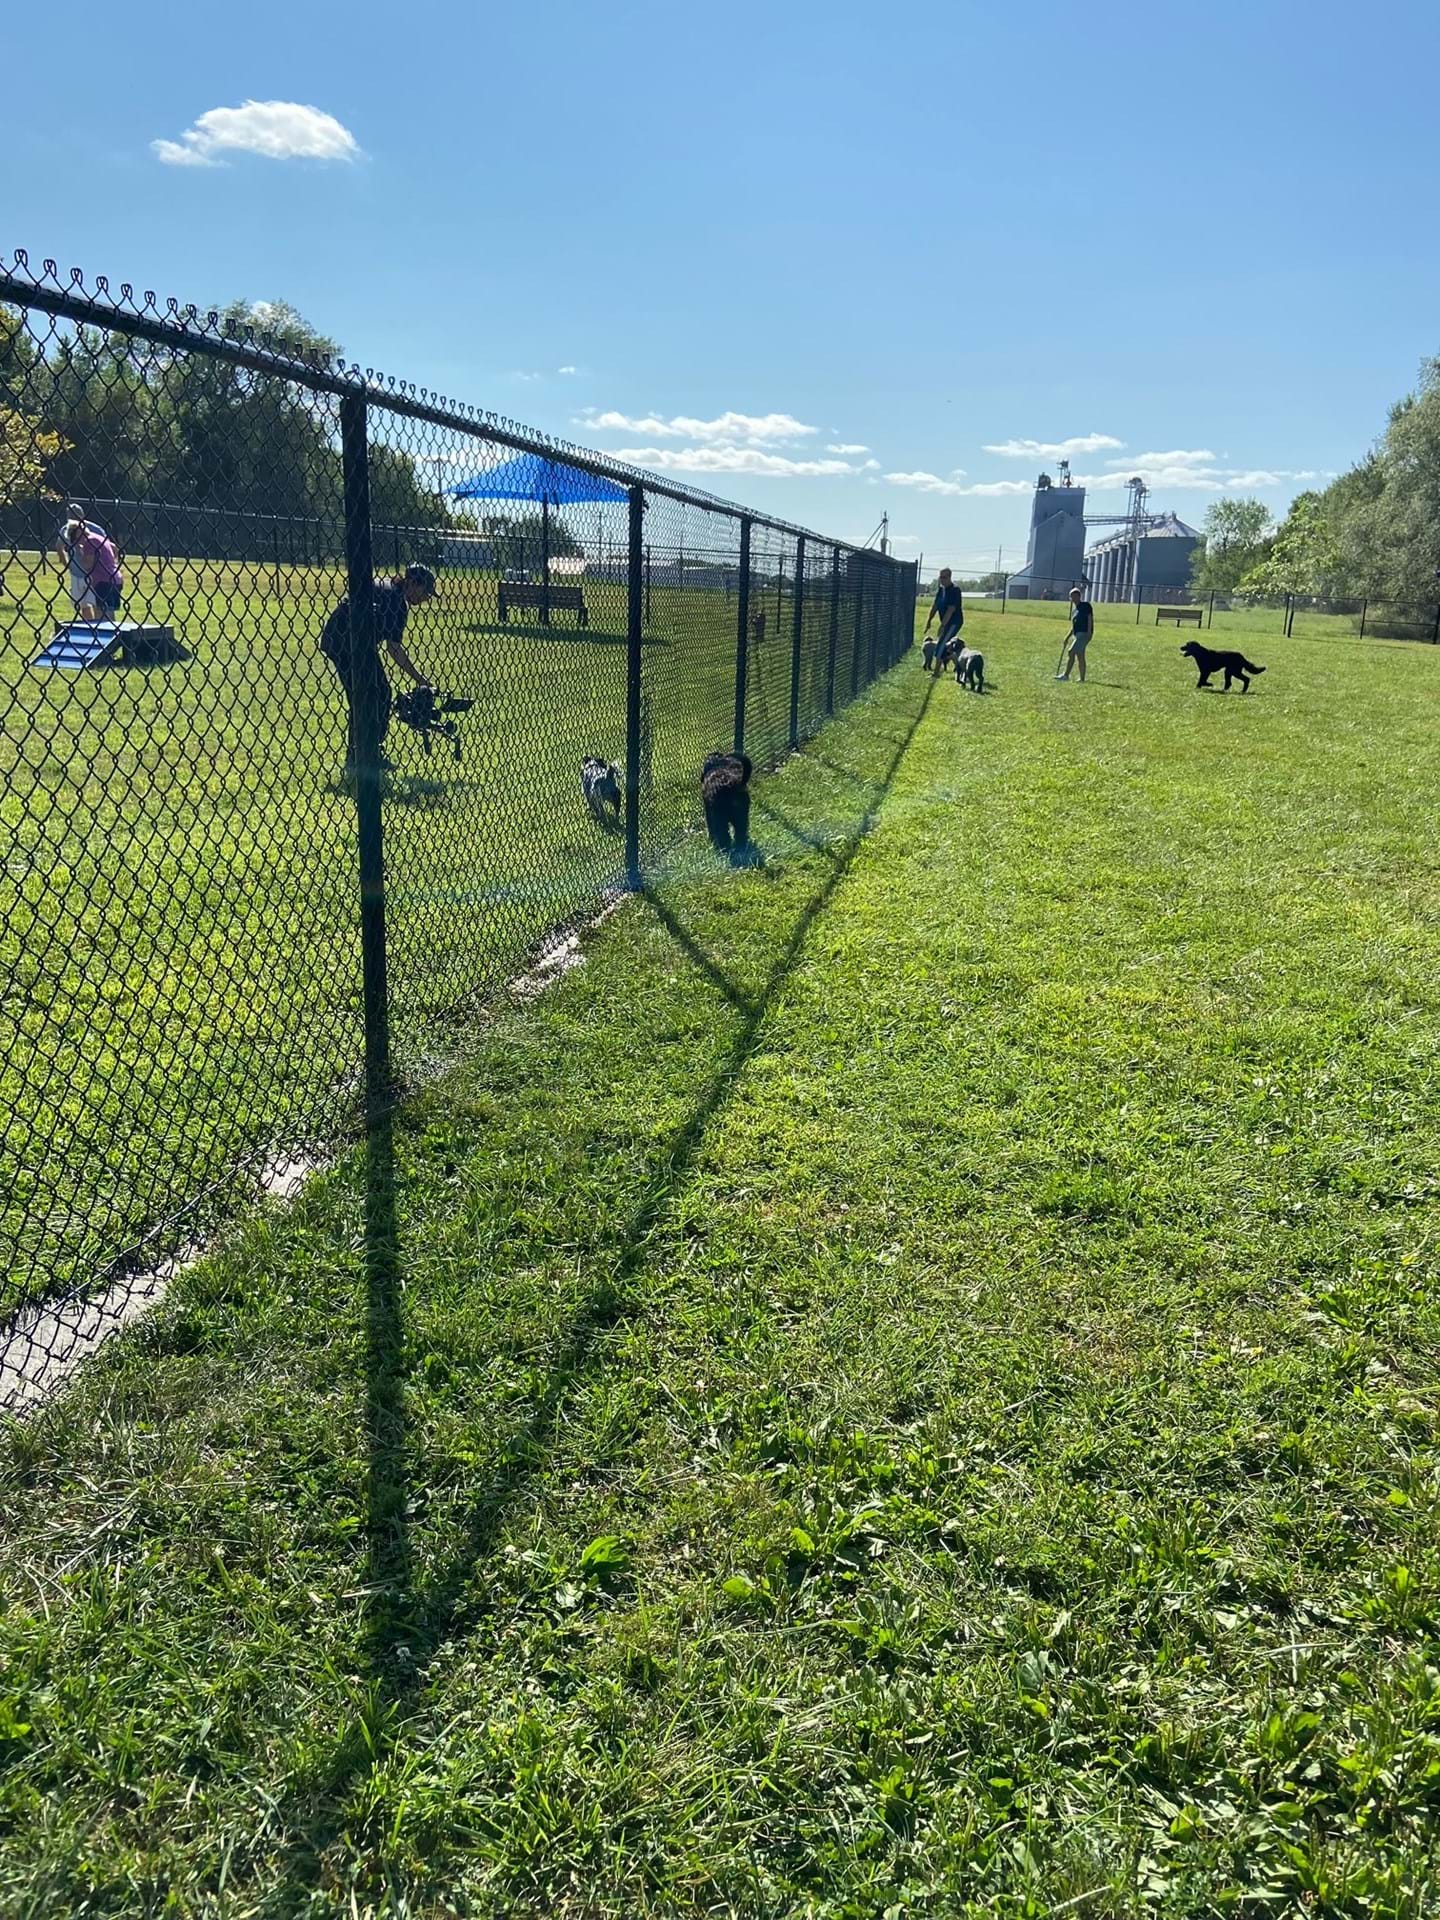 Dogs enjoying the Bark Park on a beautiful day